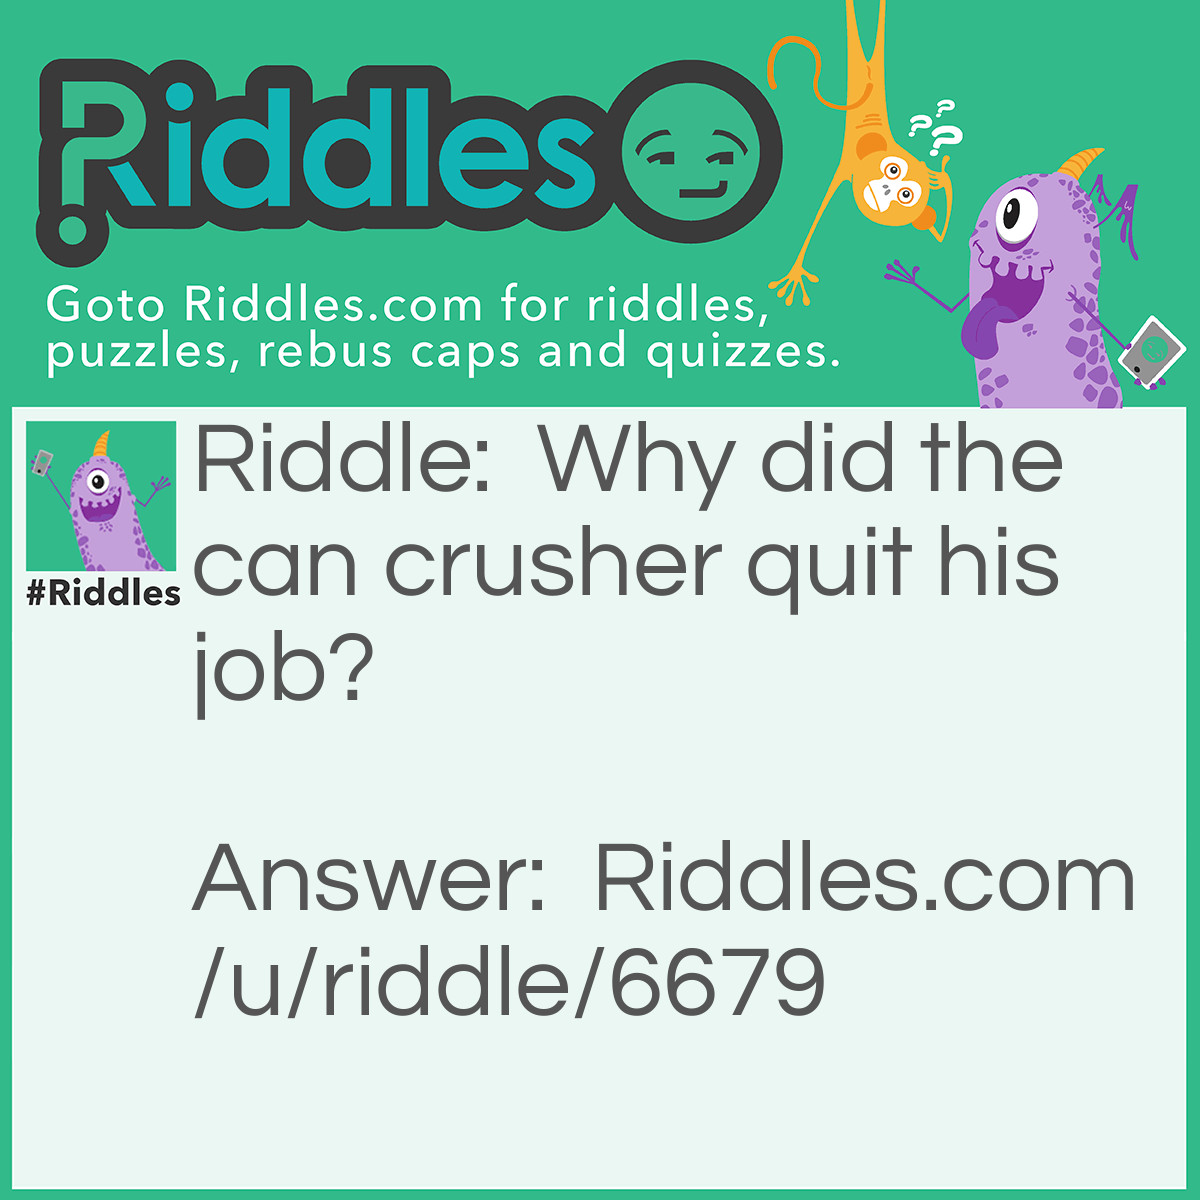 Riddle: Why did the can crusher quit his job? Answer: Because it was soda pressing.